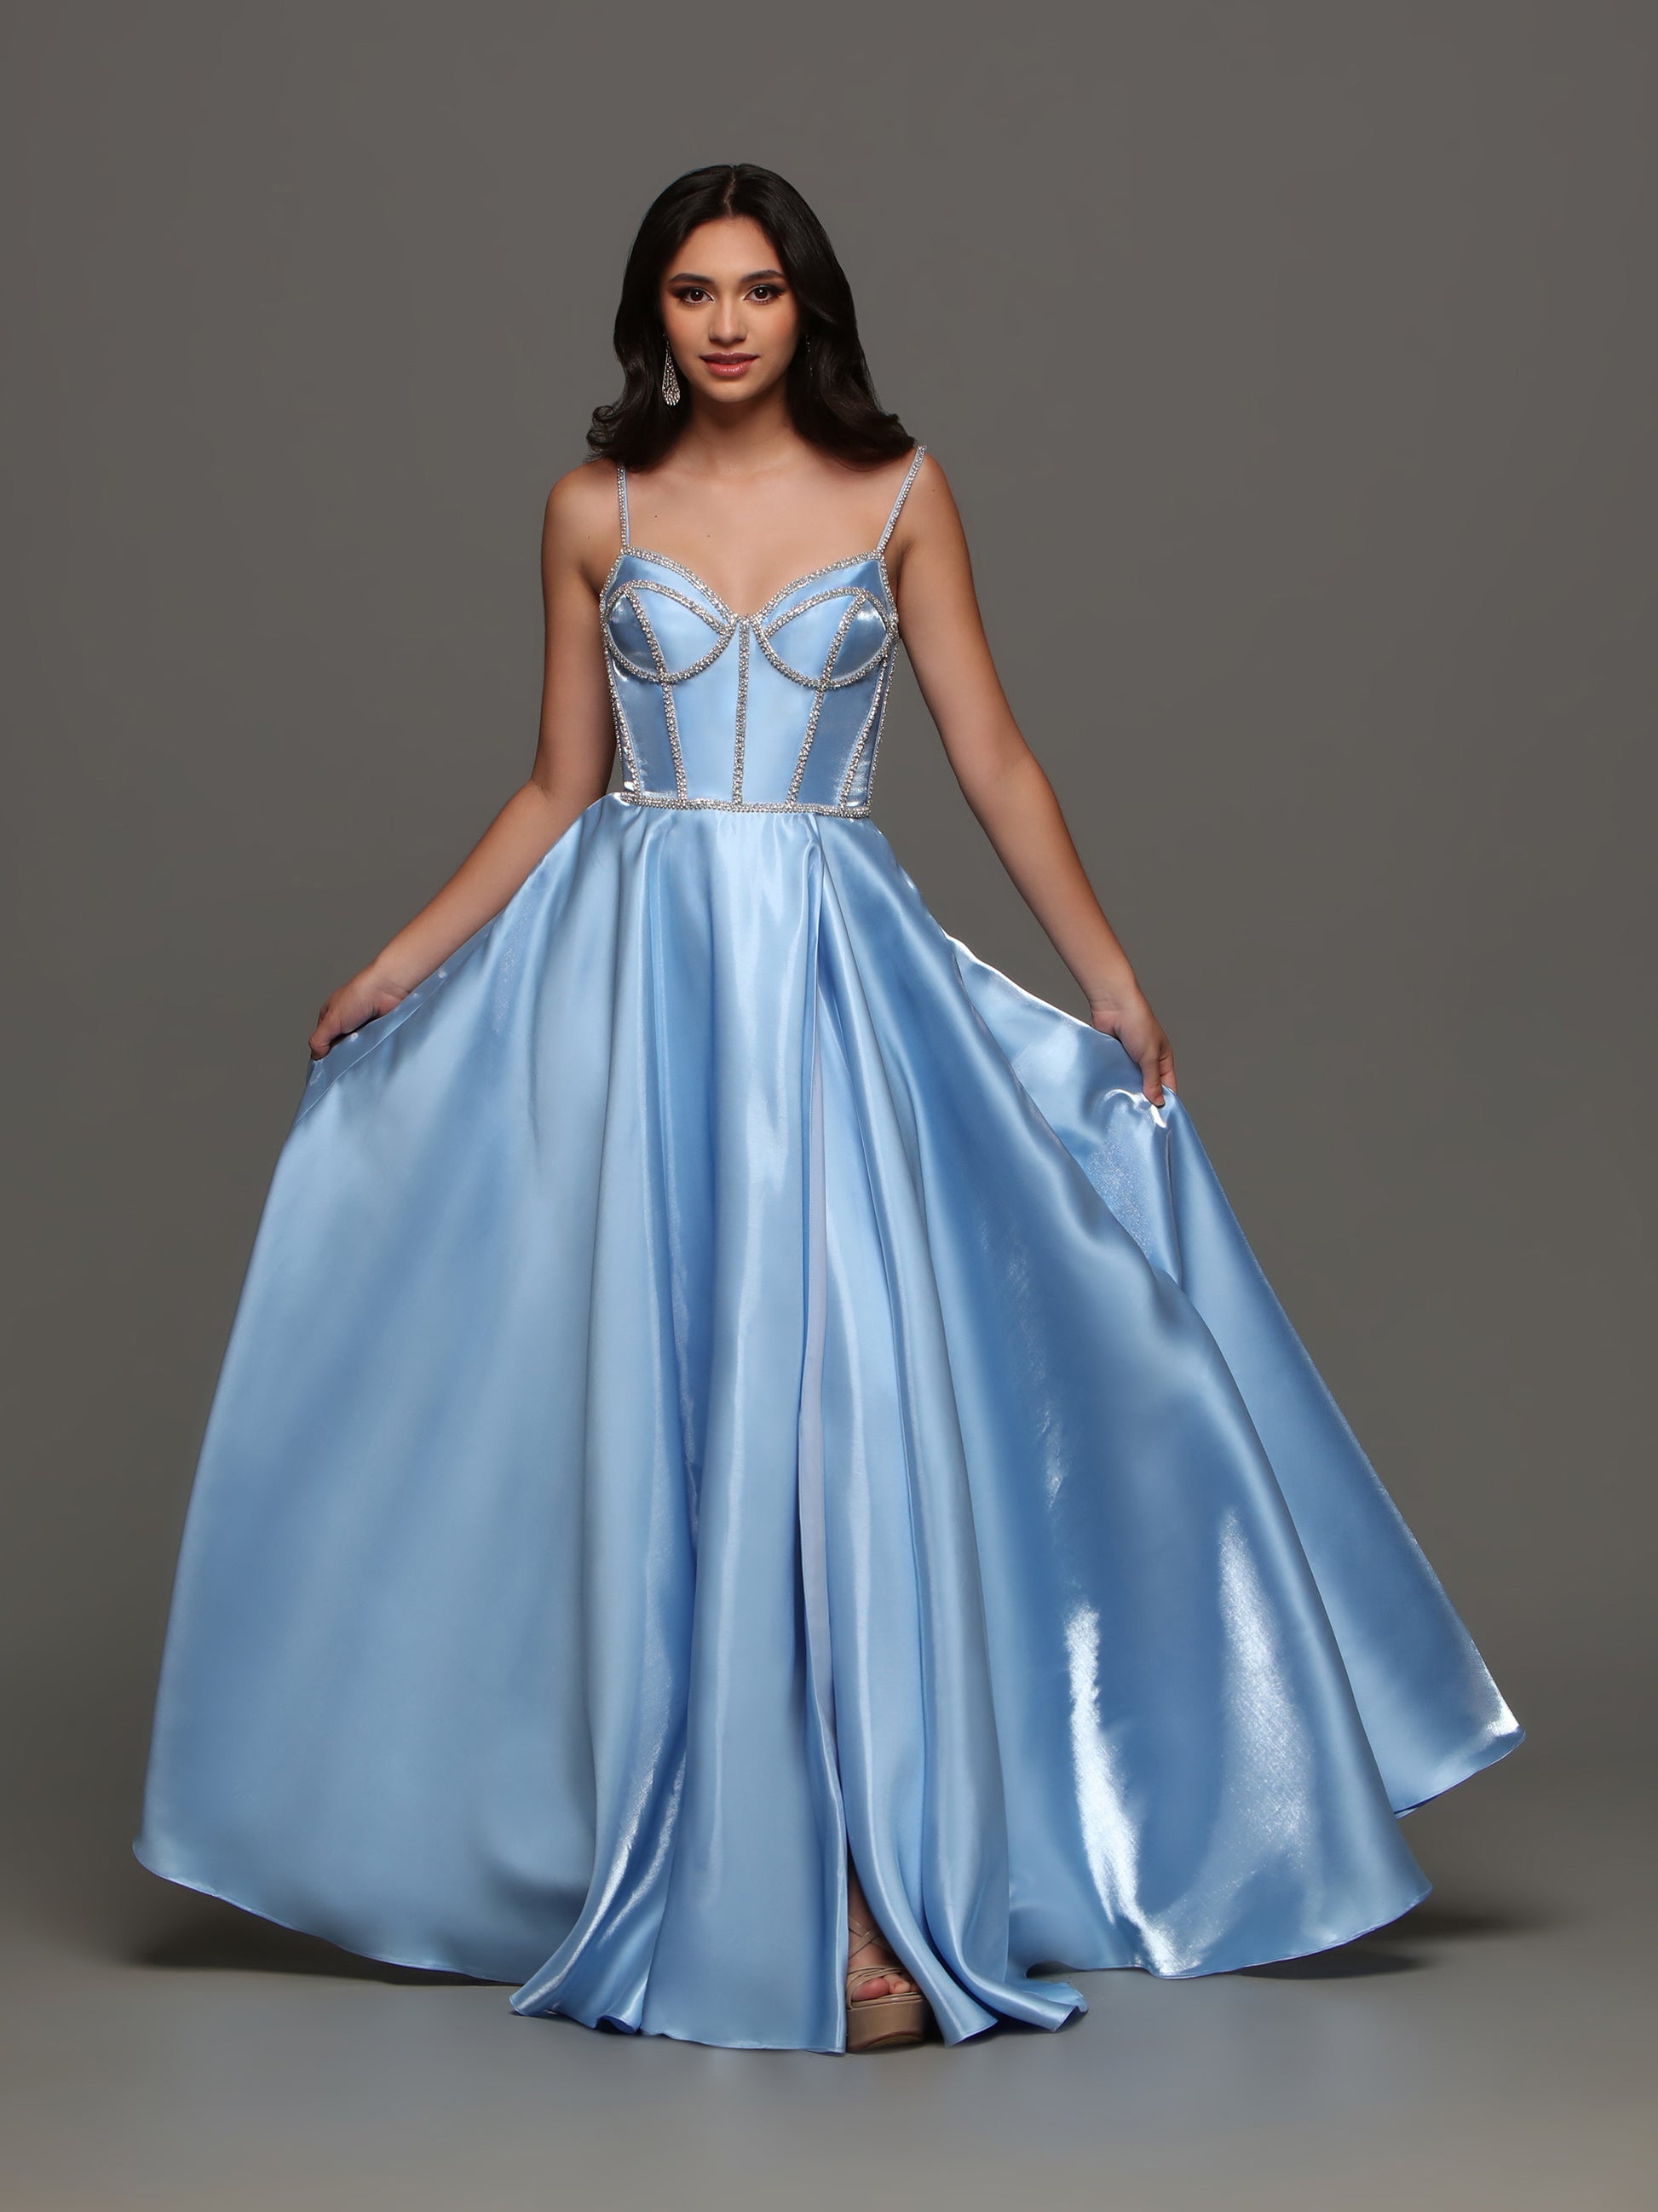 Experience elegance and glamour with the Candice Wang 72398 A Line Satin Maxi Slit Ballgown. The corset top features intricate crystal detailing, while the flowing satin skirt boasts a thigh-high slit. This dress is perfect for prom, formal events, or any special occasion. Add a touch of luxury to your wardrobe. Pockets  Sizes: 0-16  Colors: Light Blue, Red